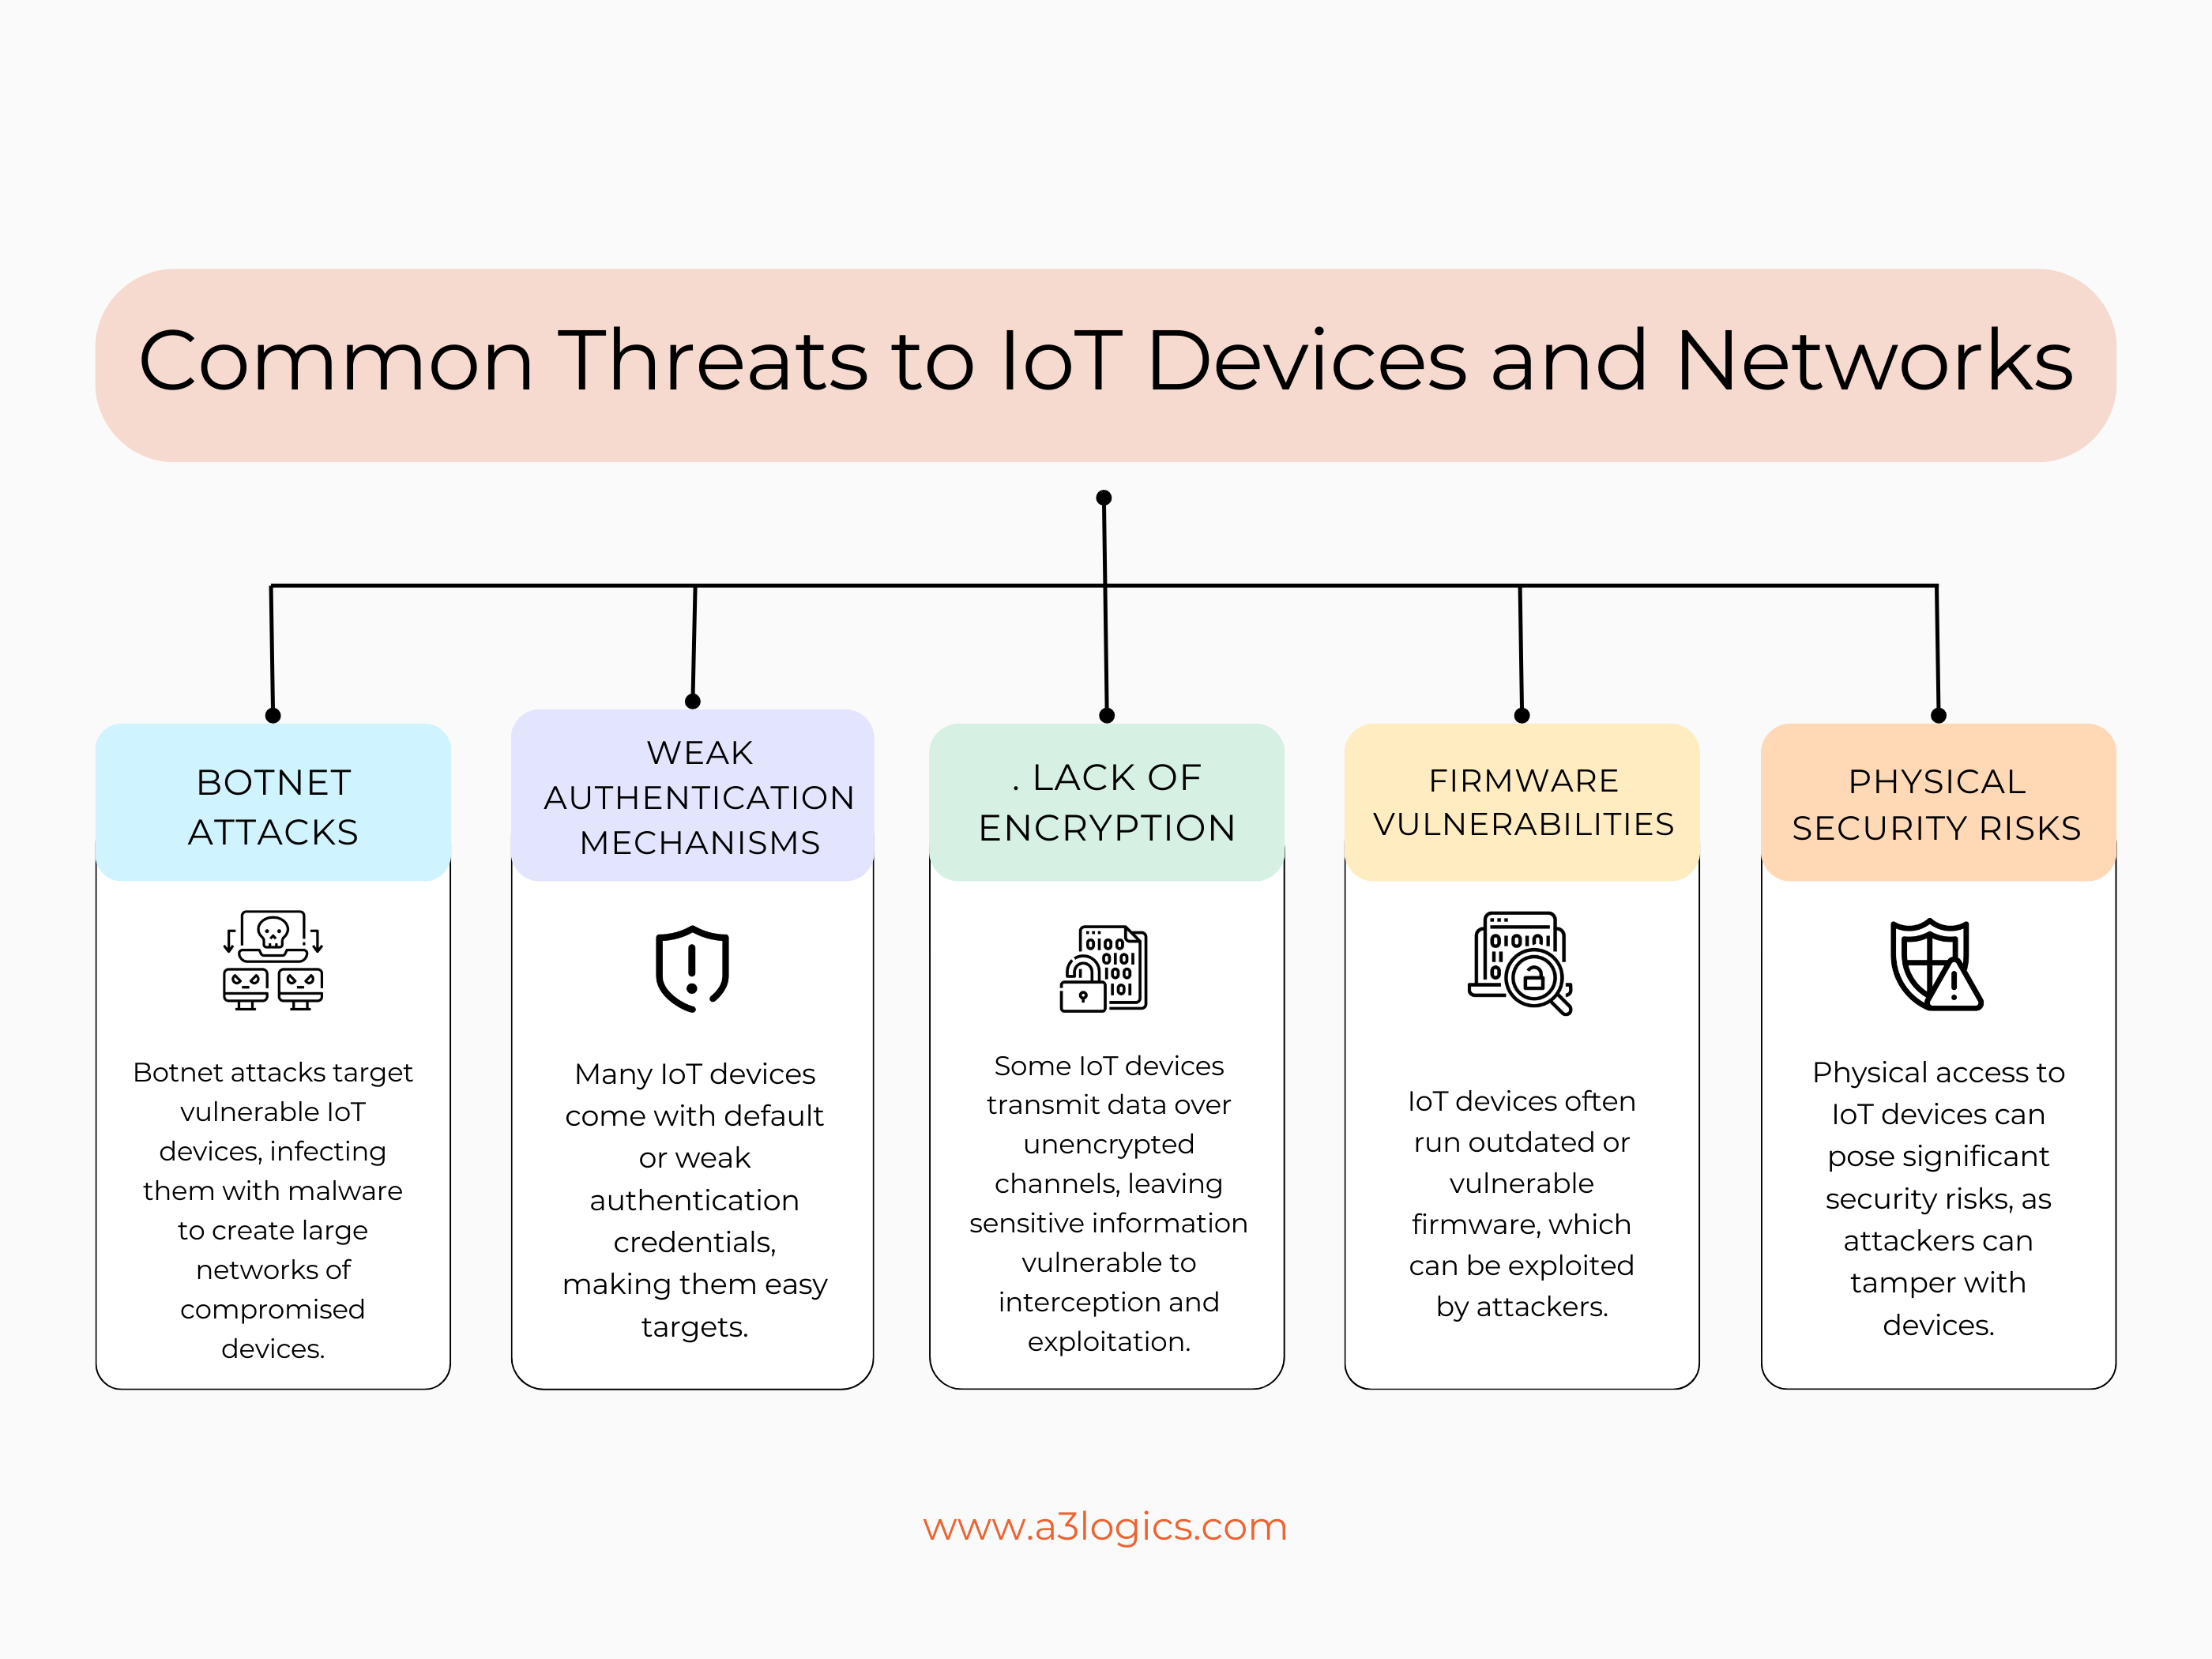 Common Threats to IoT Devices and Networks